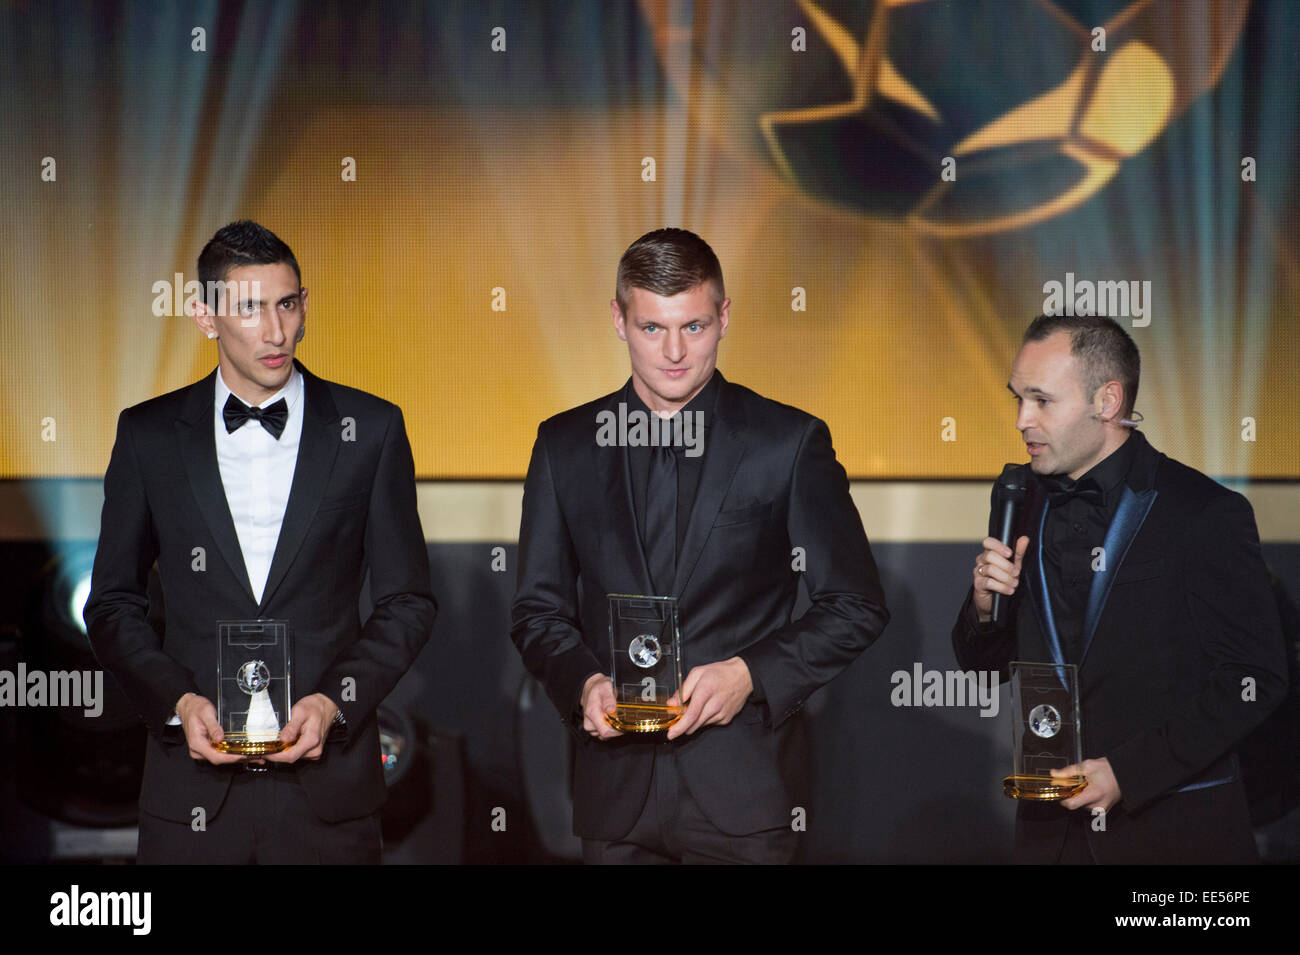 Zurich, Switzerland. 12th Jan, 2015. (L-R) Angel Di Maria, Toni Kroos, Andres Iniesta Football/Soccer : Andres Iniesta speaks after receiving the FIFA/FIFPro World XI 2014 trophy during the FIFA Ballon d'Or 2014 Gala at Kongresshaus in Zurich, Switzerland . © Maurizio Borsari/AFLO/Alamy Live News Stock Photo